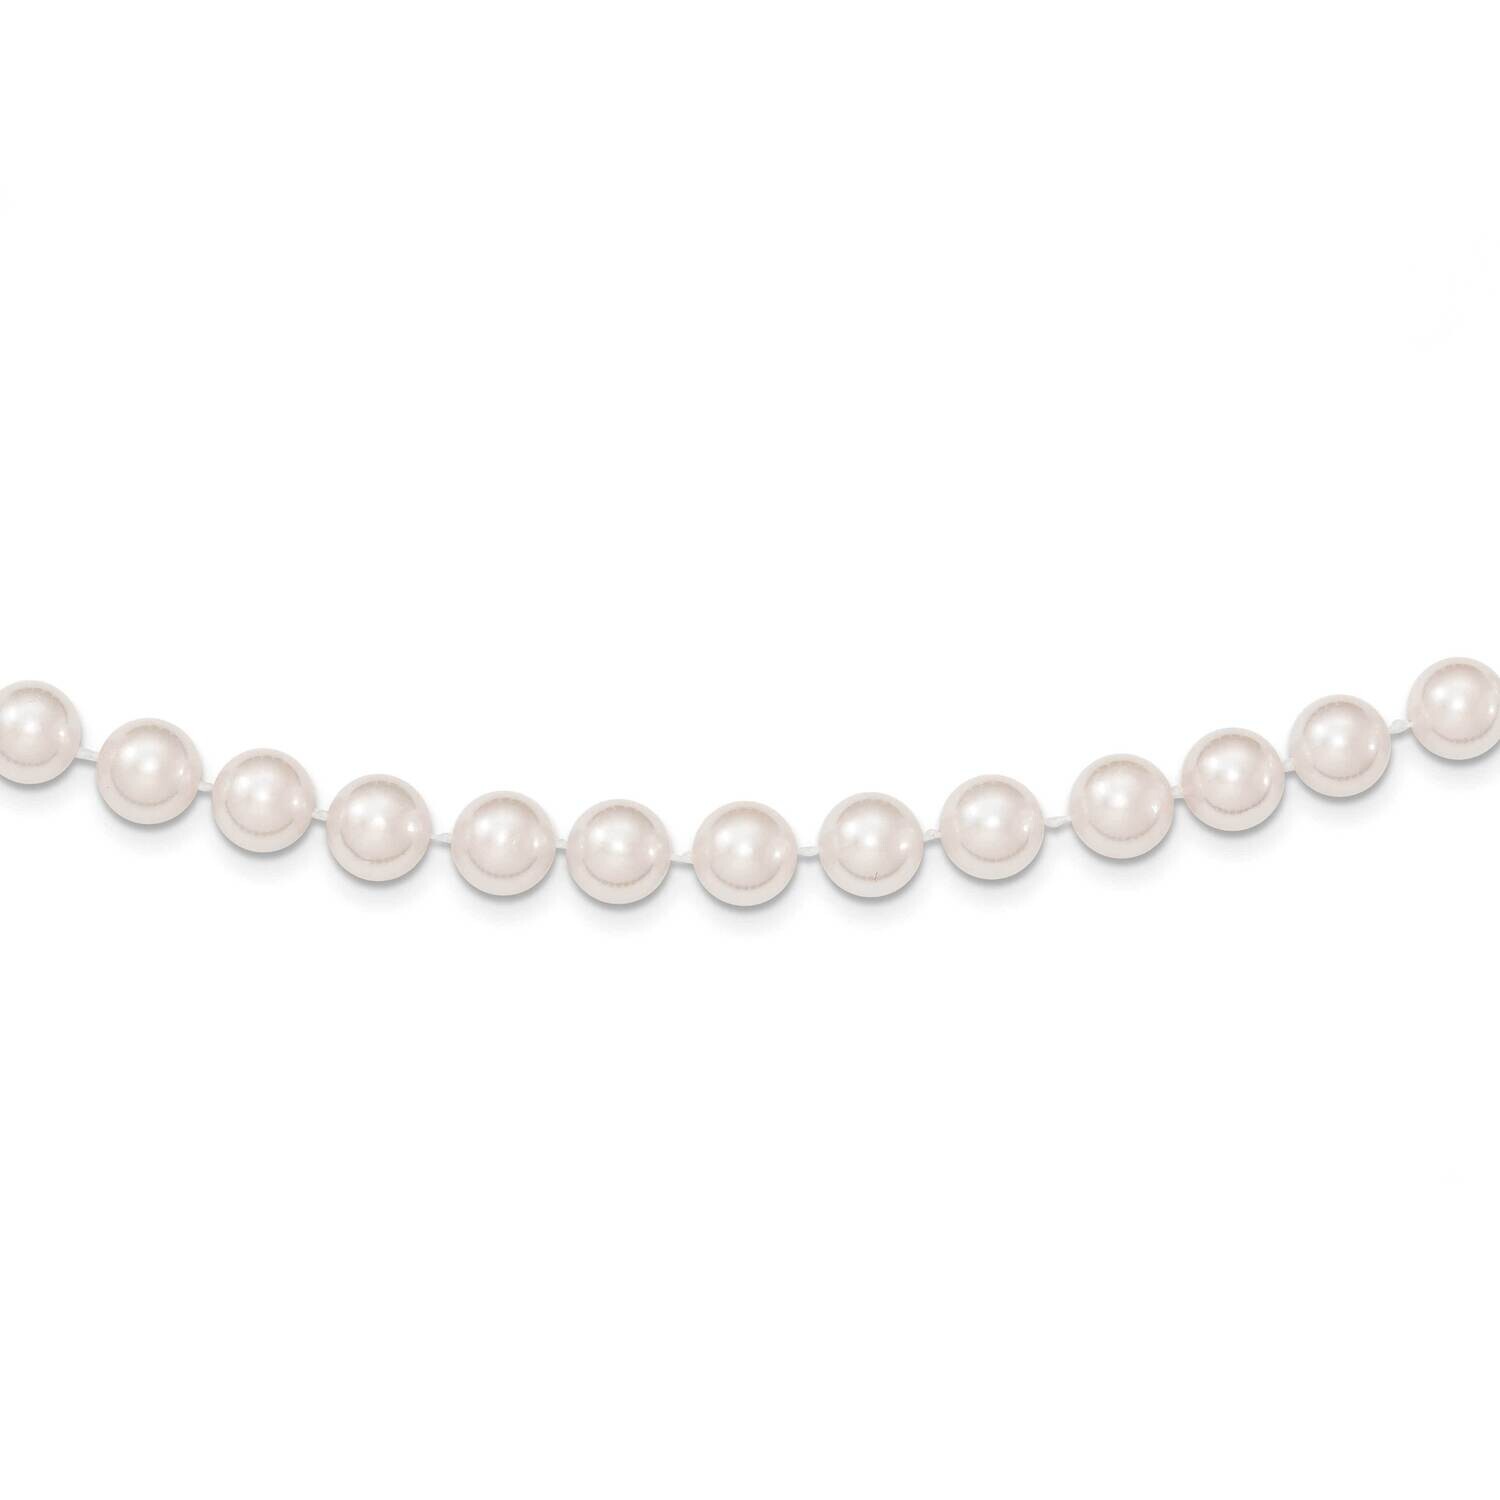 7-8mm Round White Saltwater Akoya Cultured Pearl Necklace 24 Inch 14k Gold PL70A-24